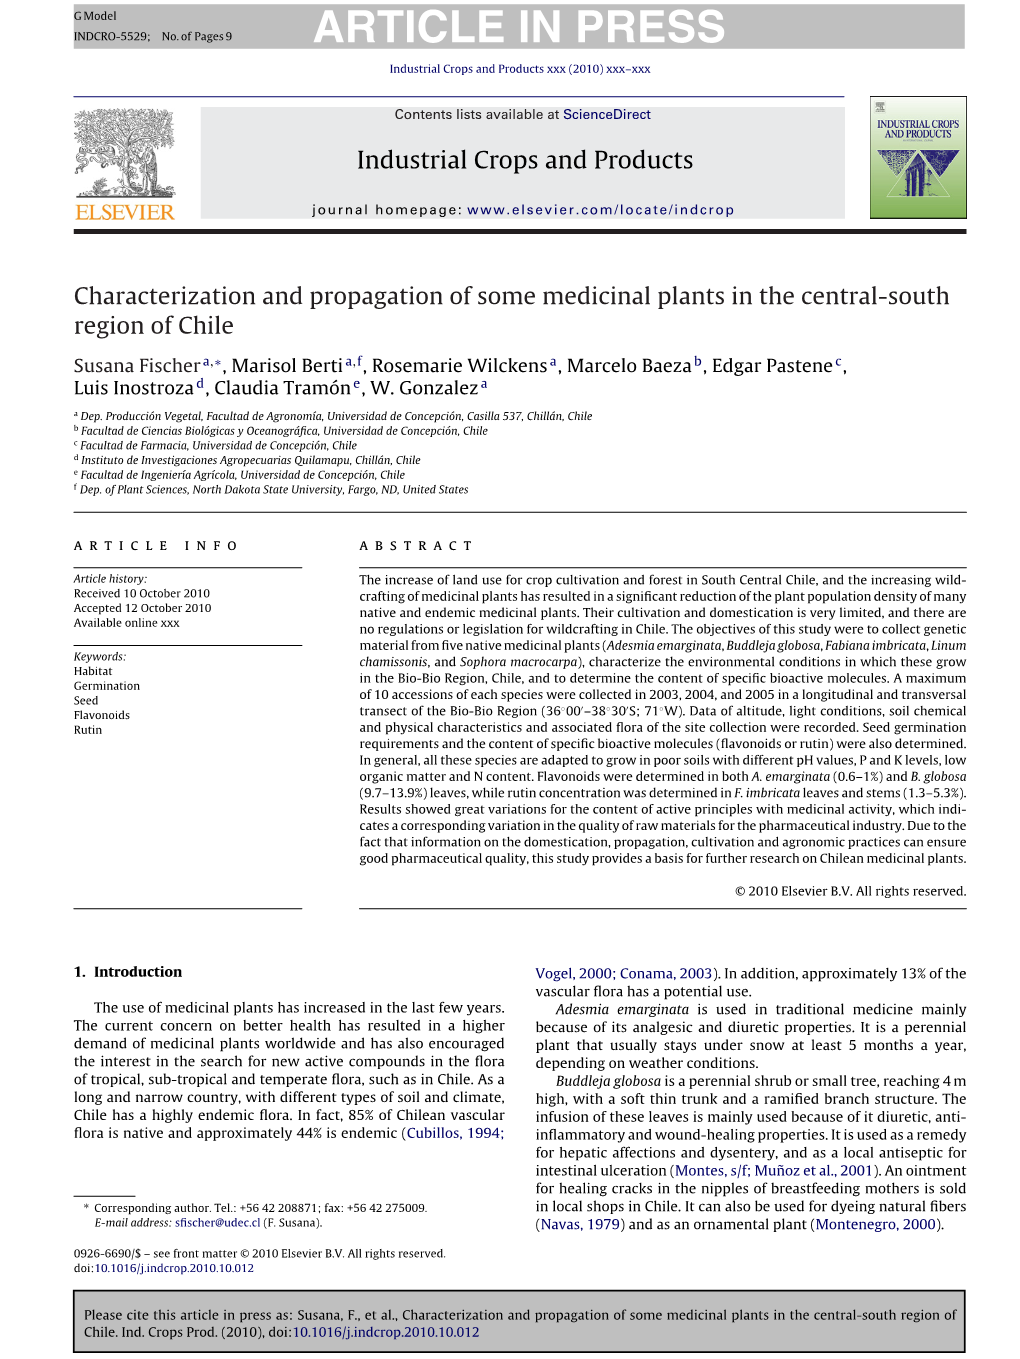 Characterization and Propagation of Some Medicinal Plants in the Central-South Region of Chile